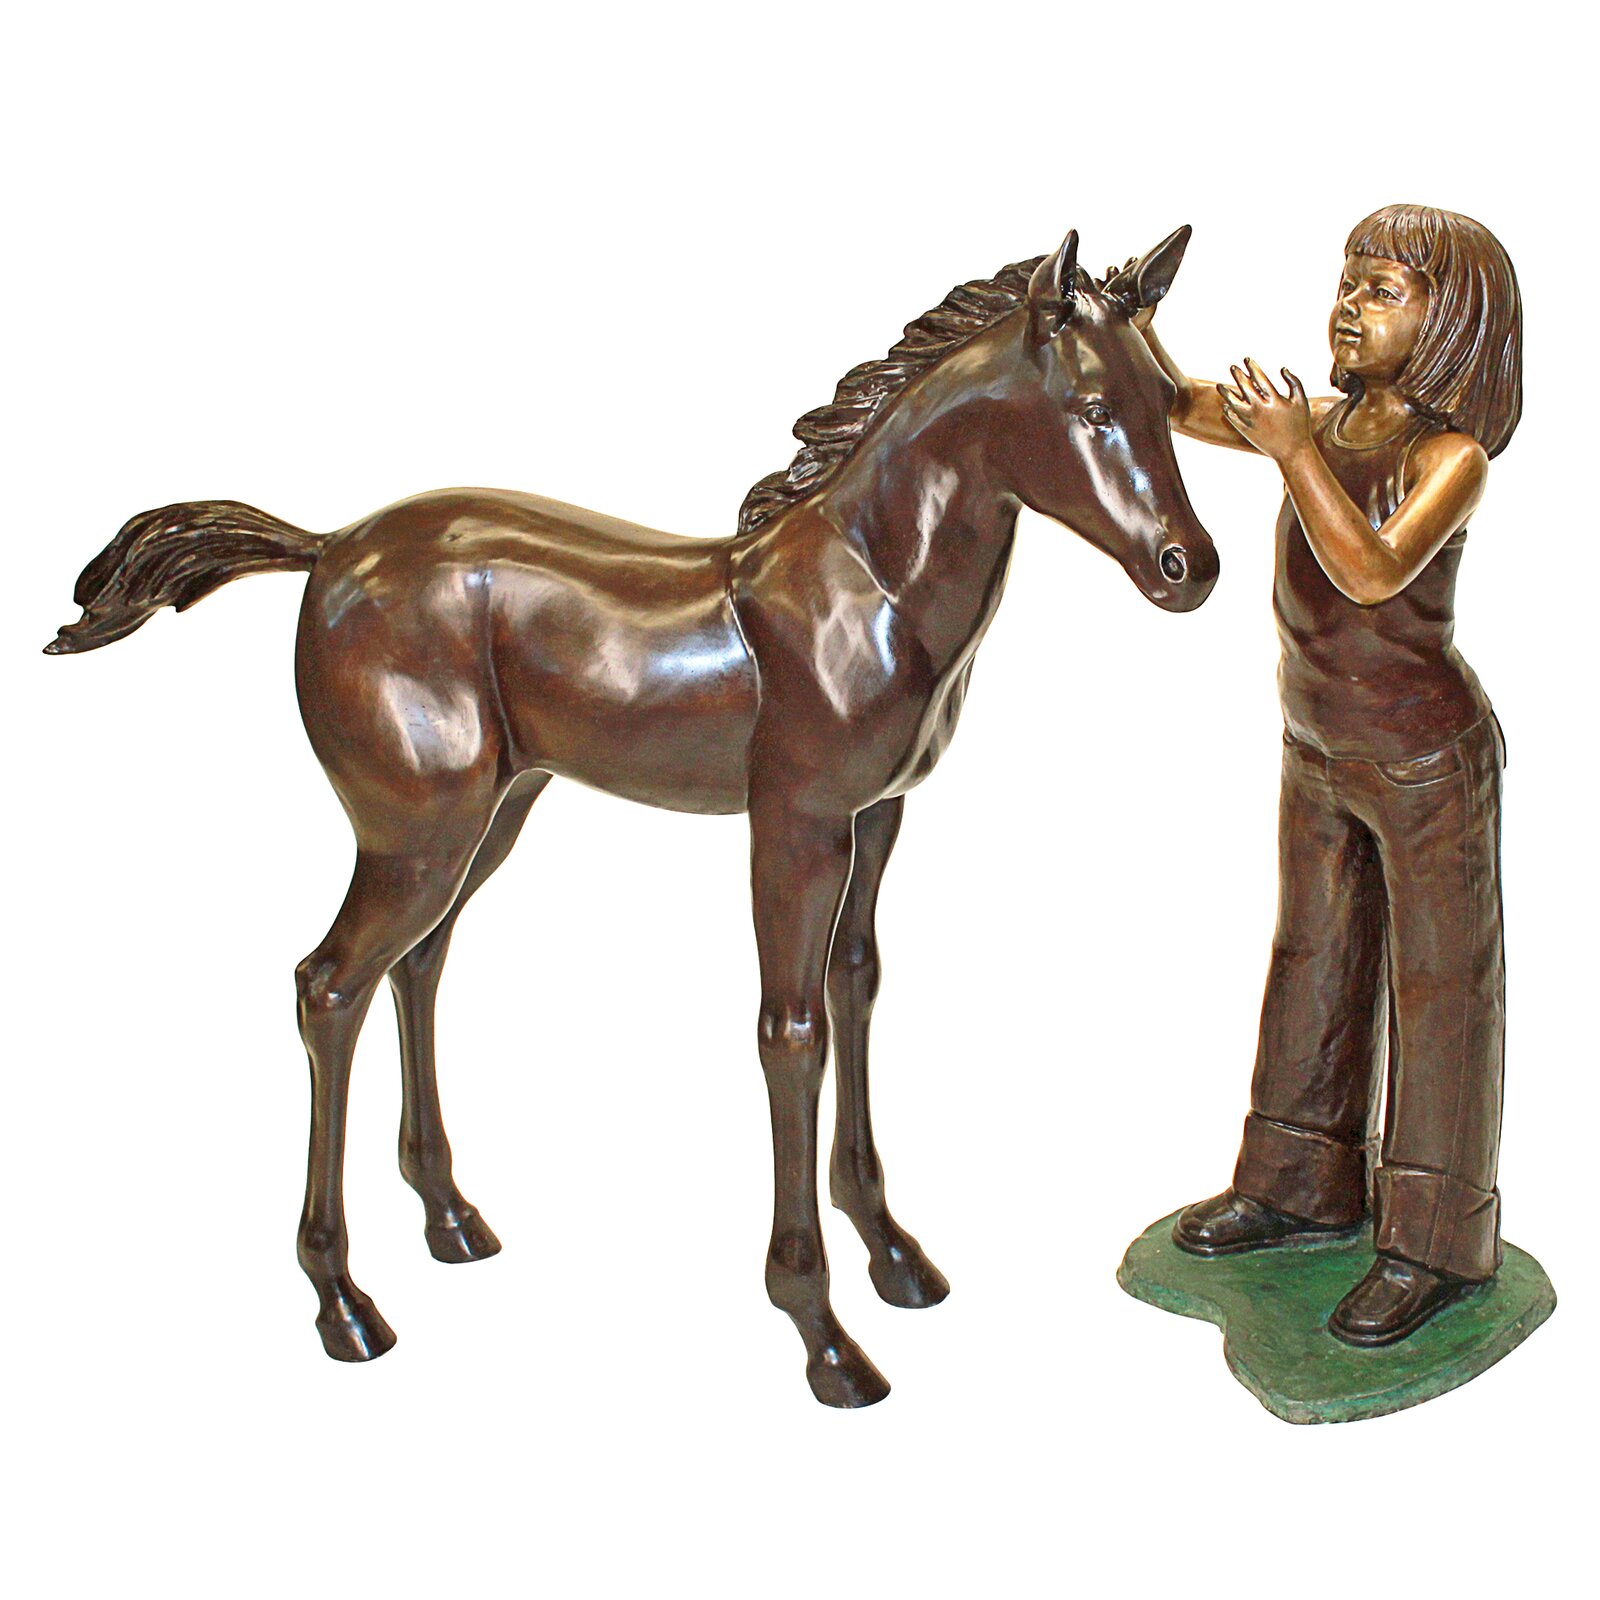 Girl with Horse Statue